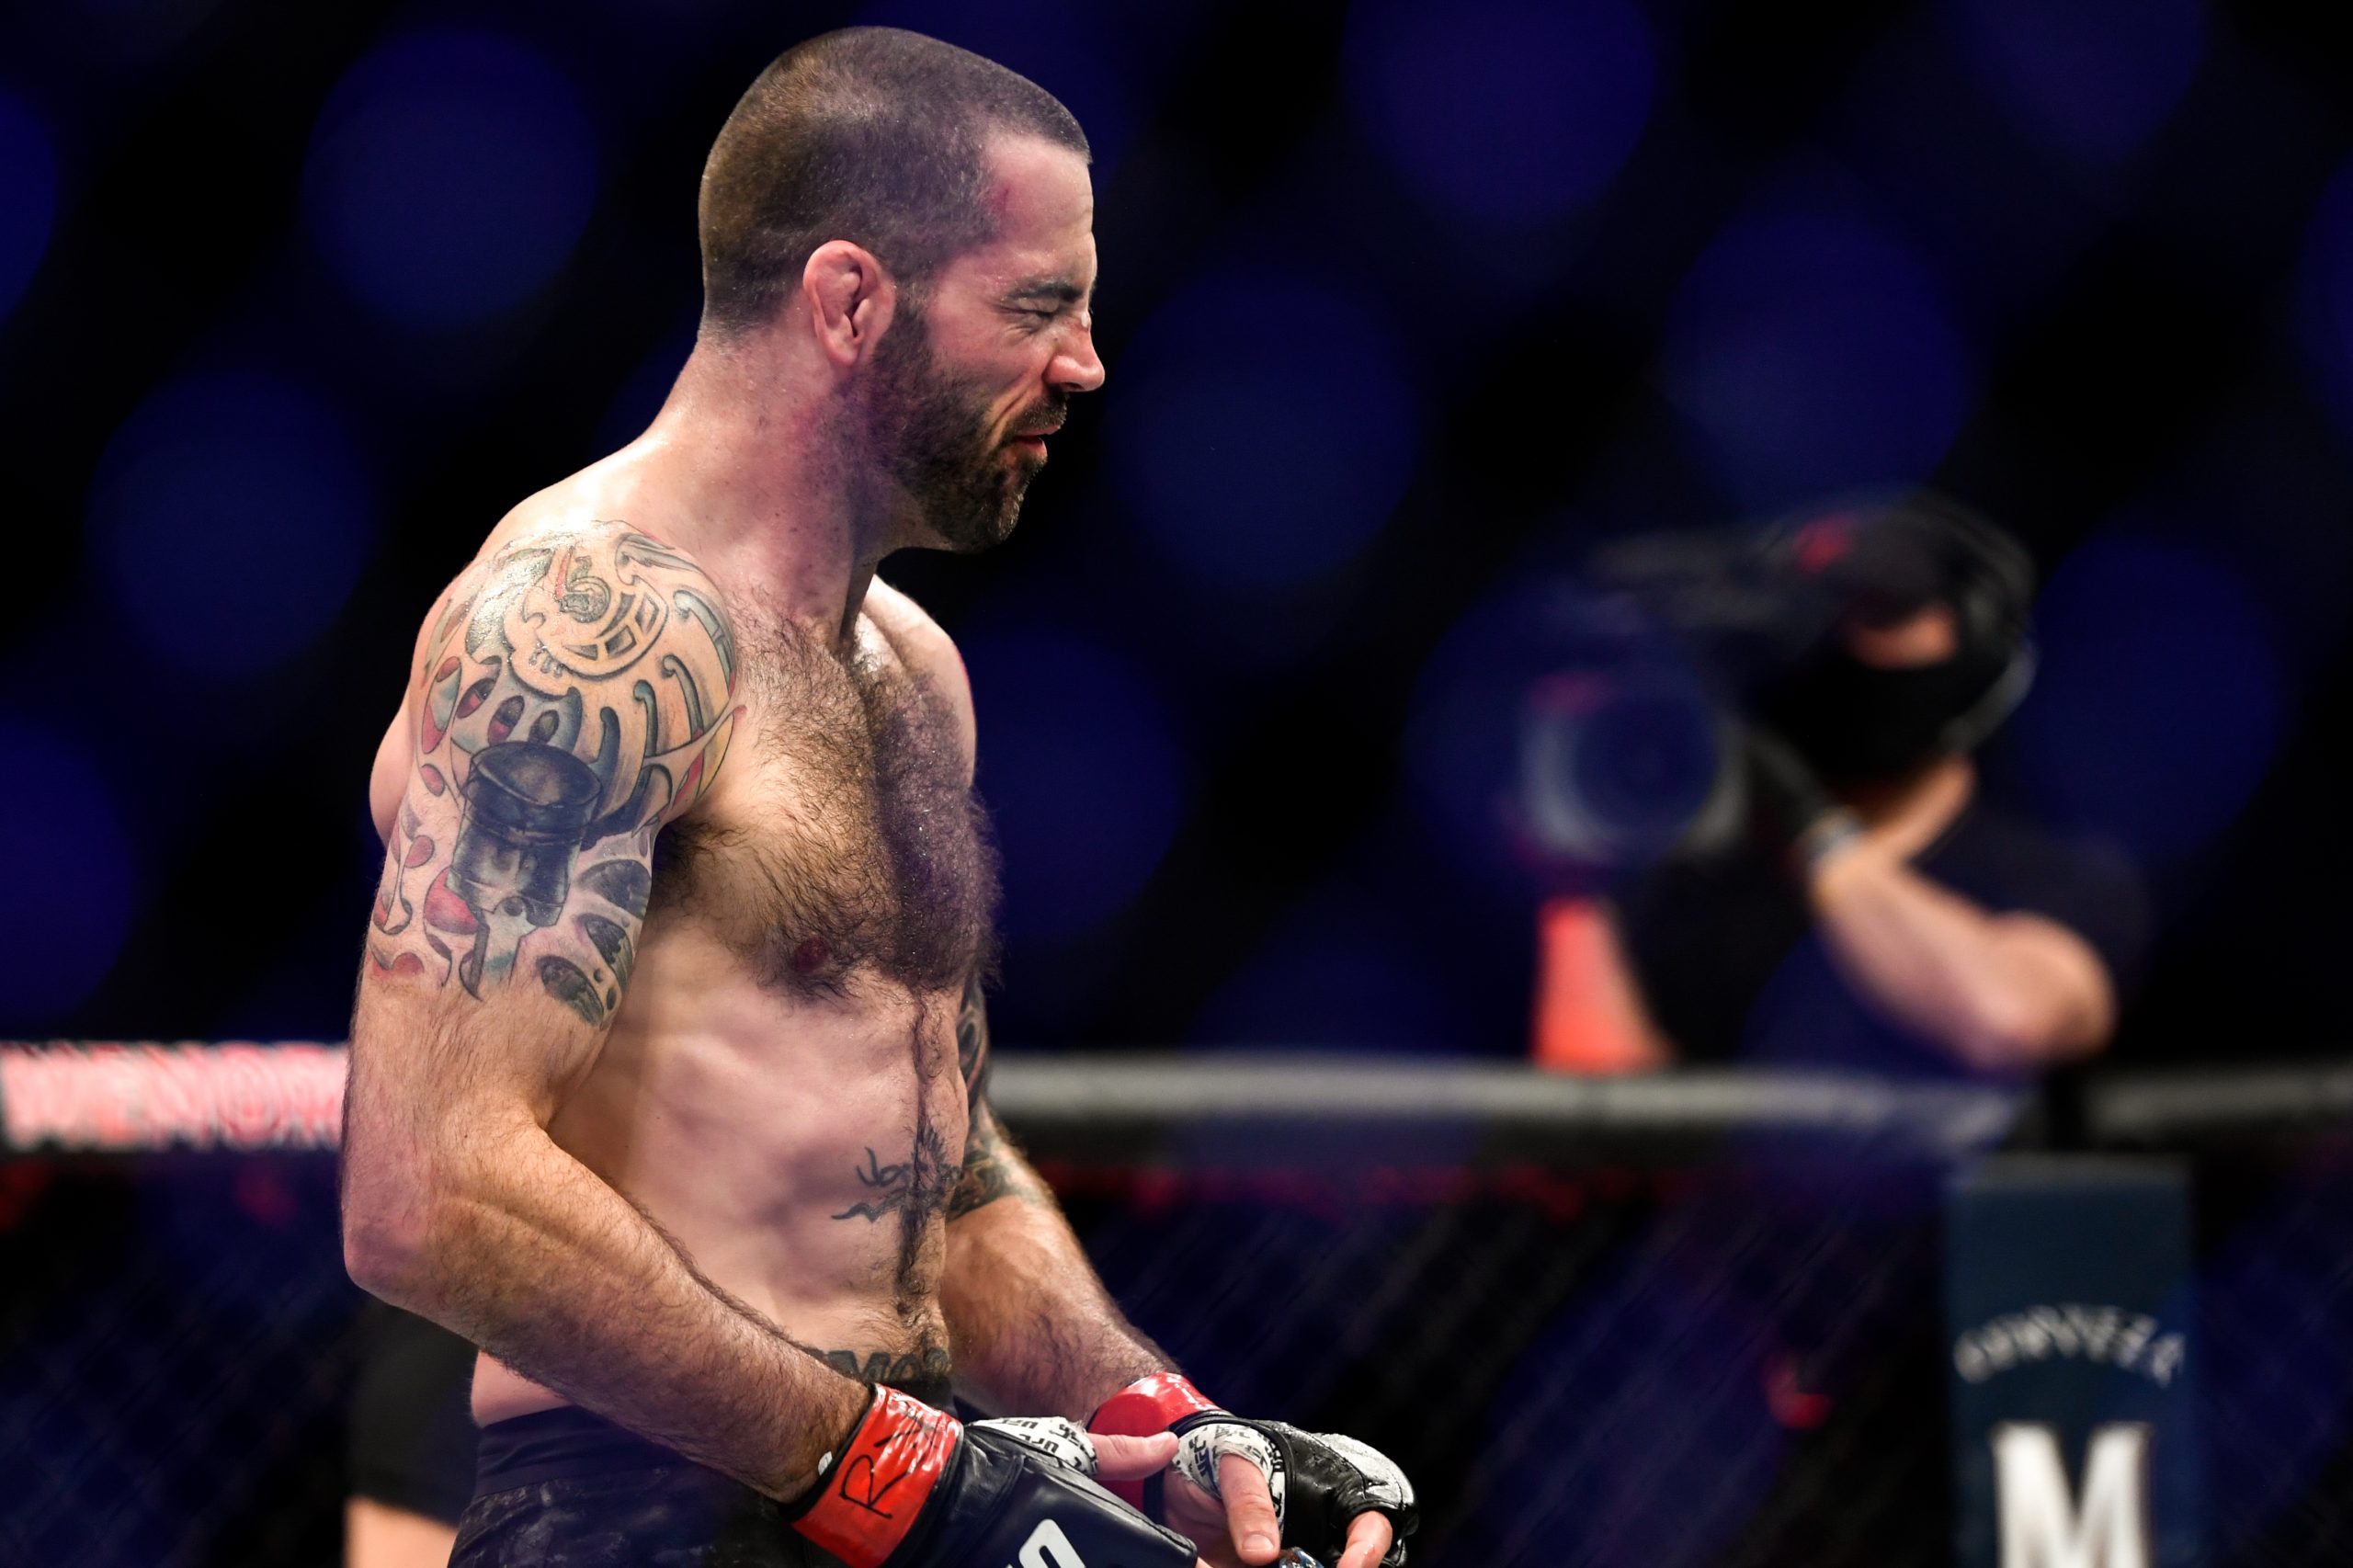 Matt Brown was unhappy with the result against Carlos Condit and hit out at the UFC judges